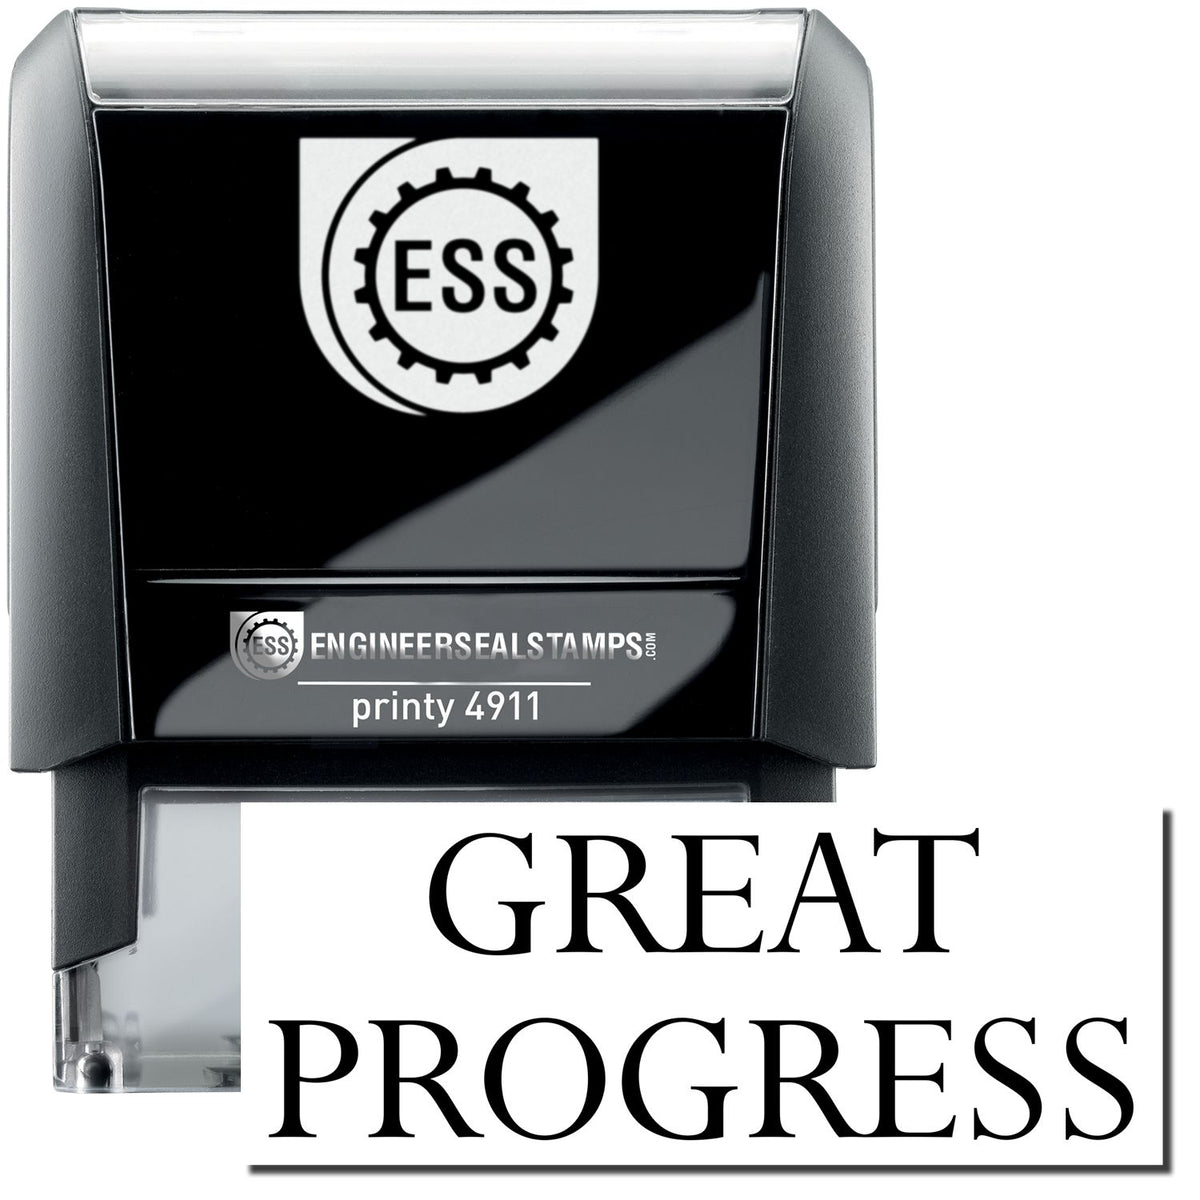 A self-inking stamp with a stamped image showing how the text &quot;GREAT PROGRESS&quot; is displayed after stamping.